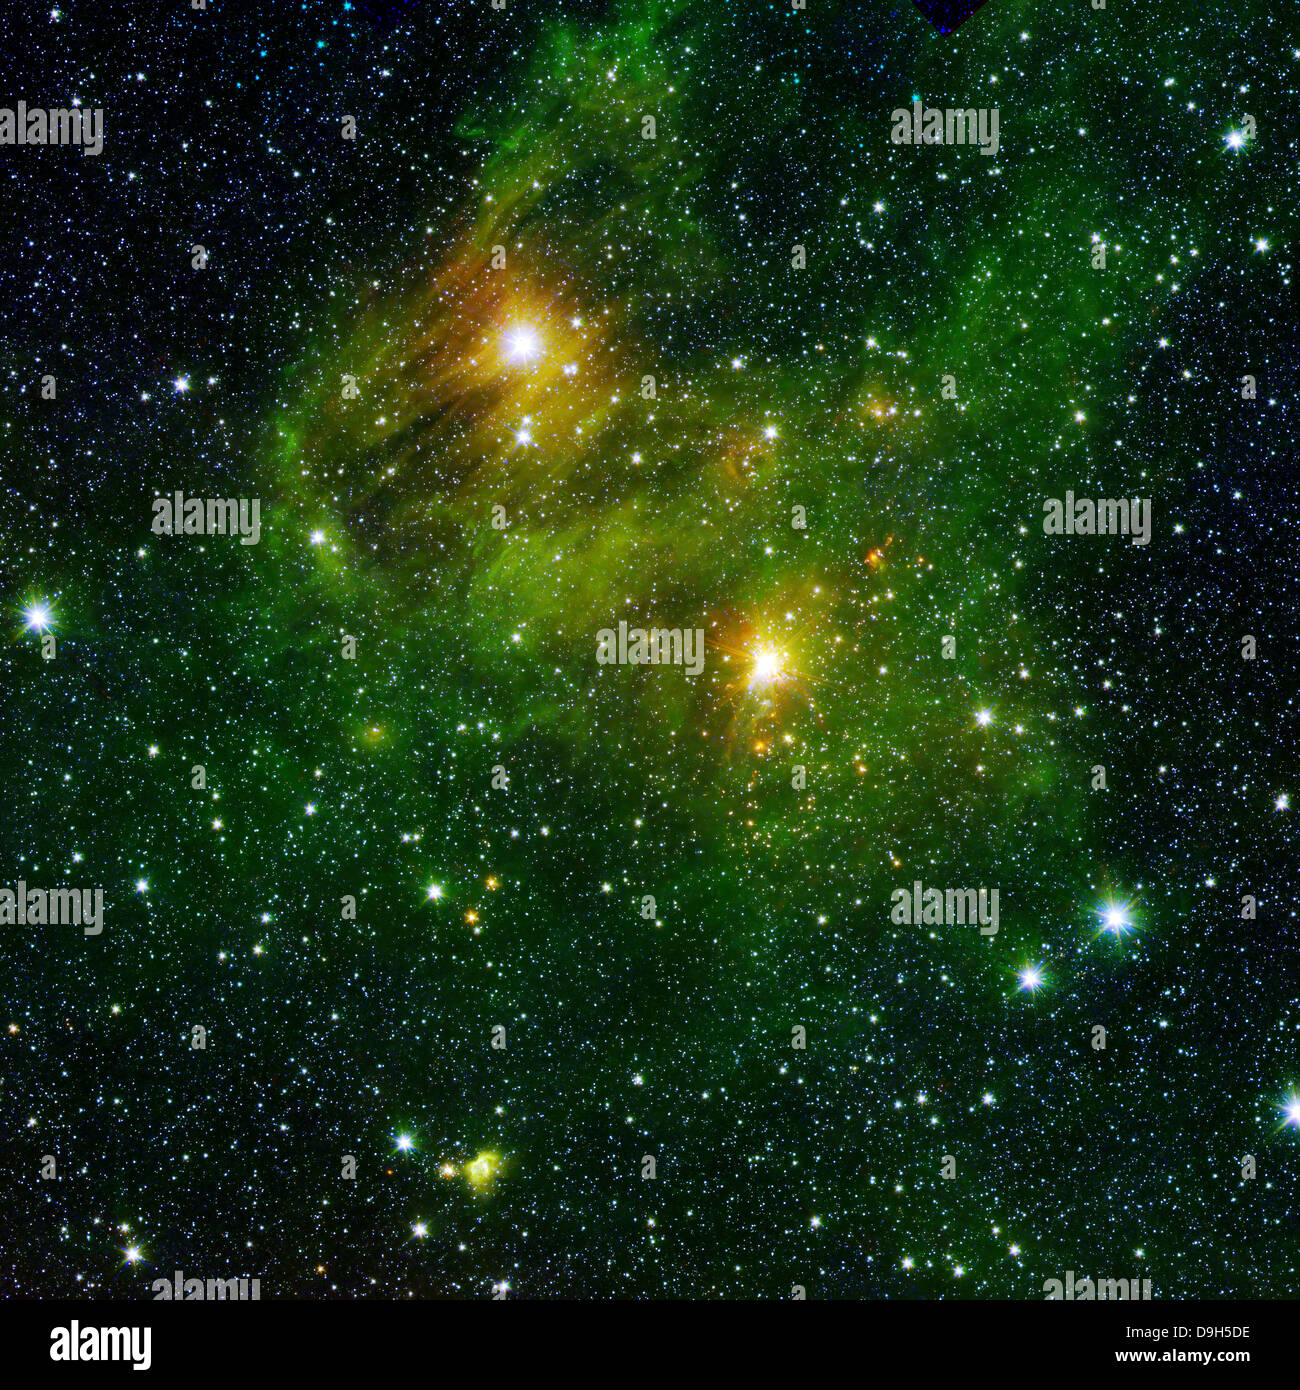 Two extremely bright stars illuminate a greenish mist in deep space. Stock Photo